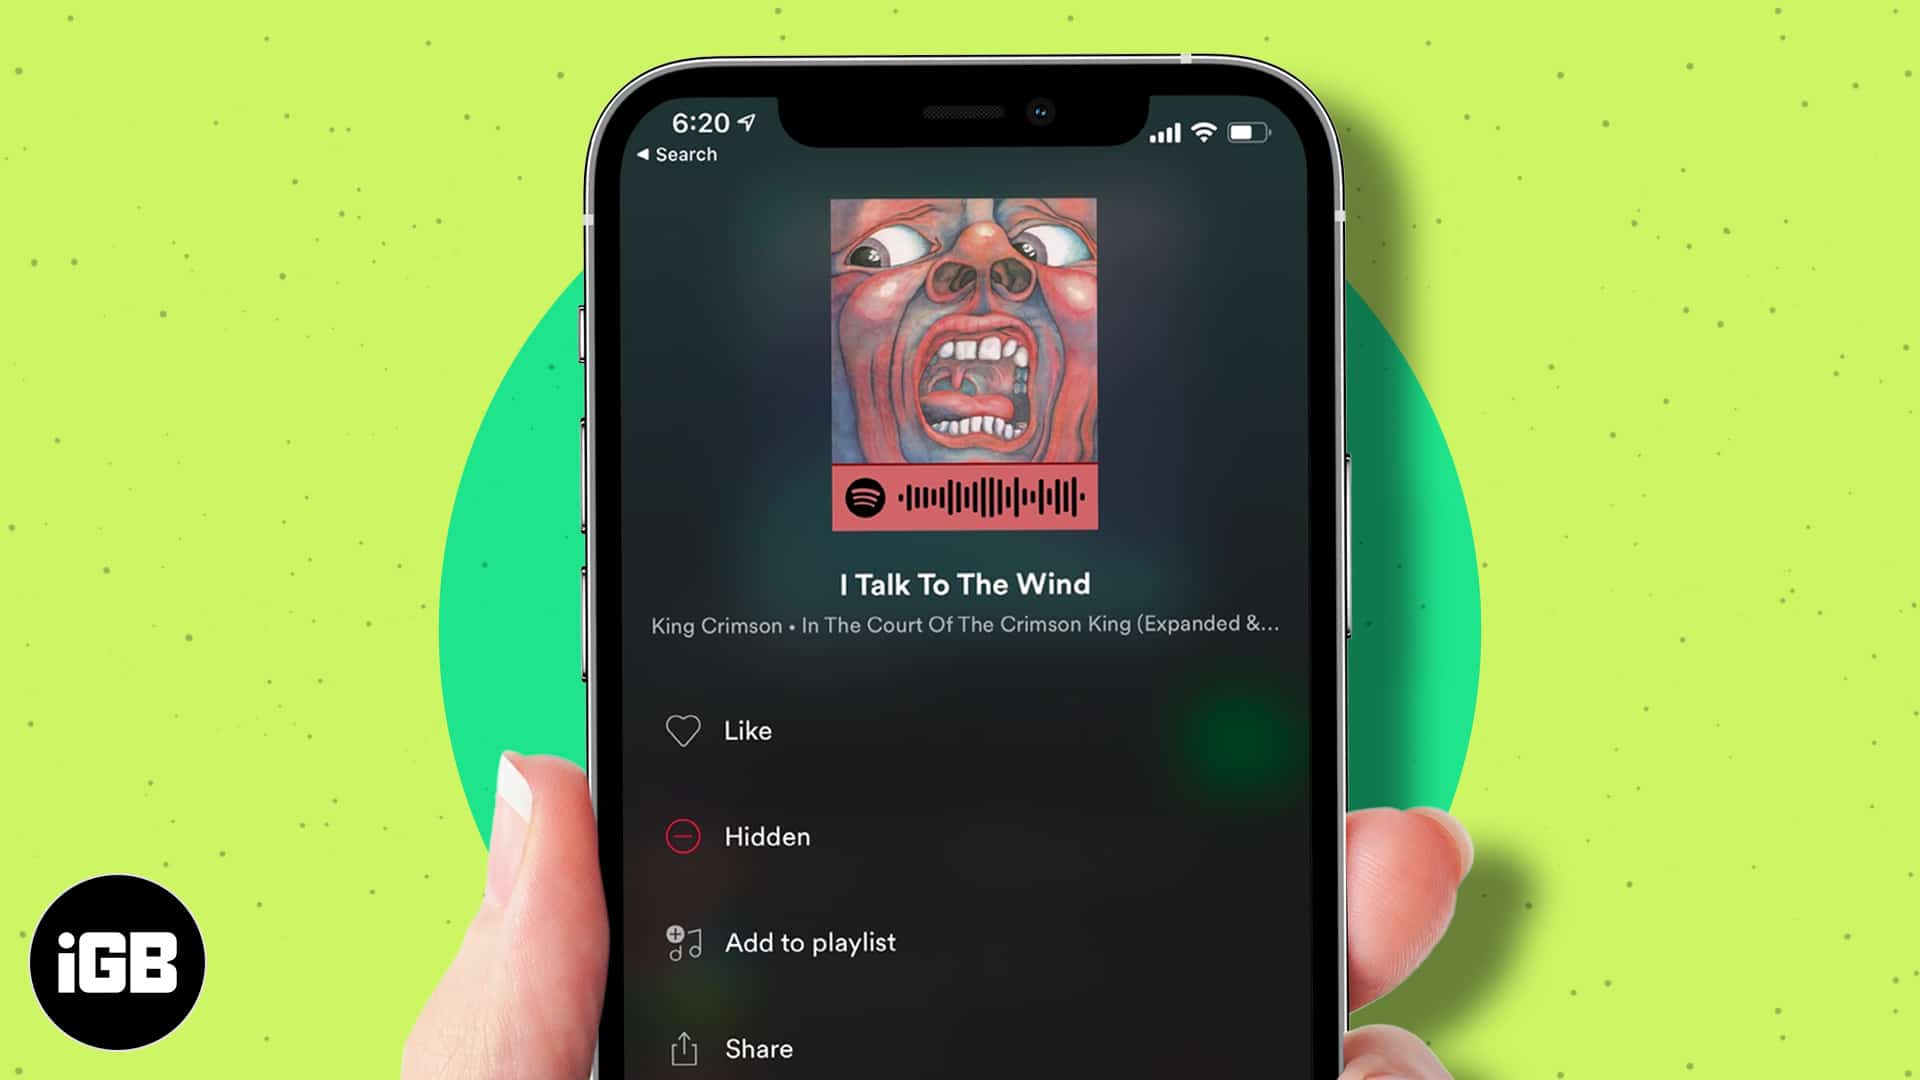 How to hide and unhide songs in Spotify